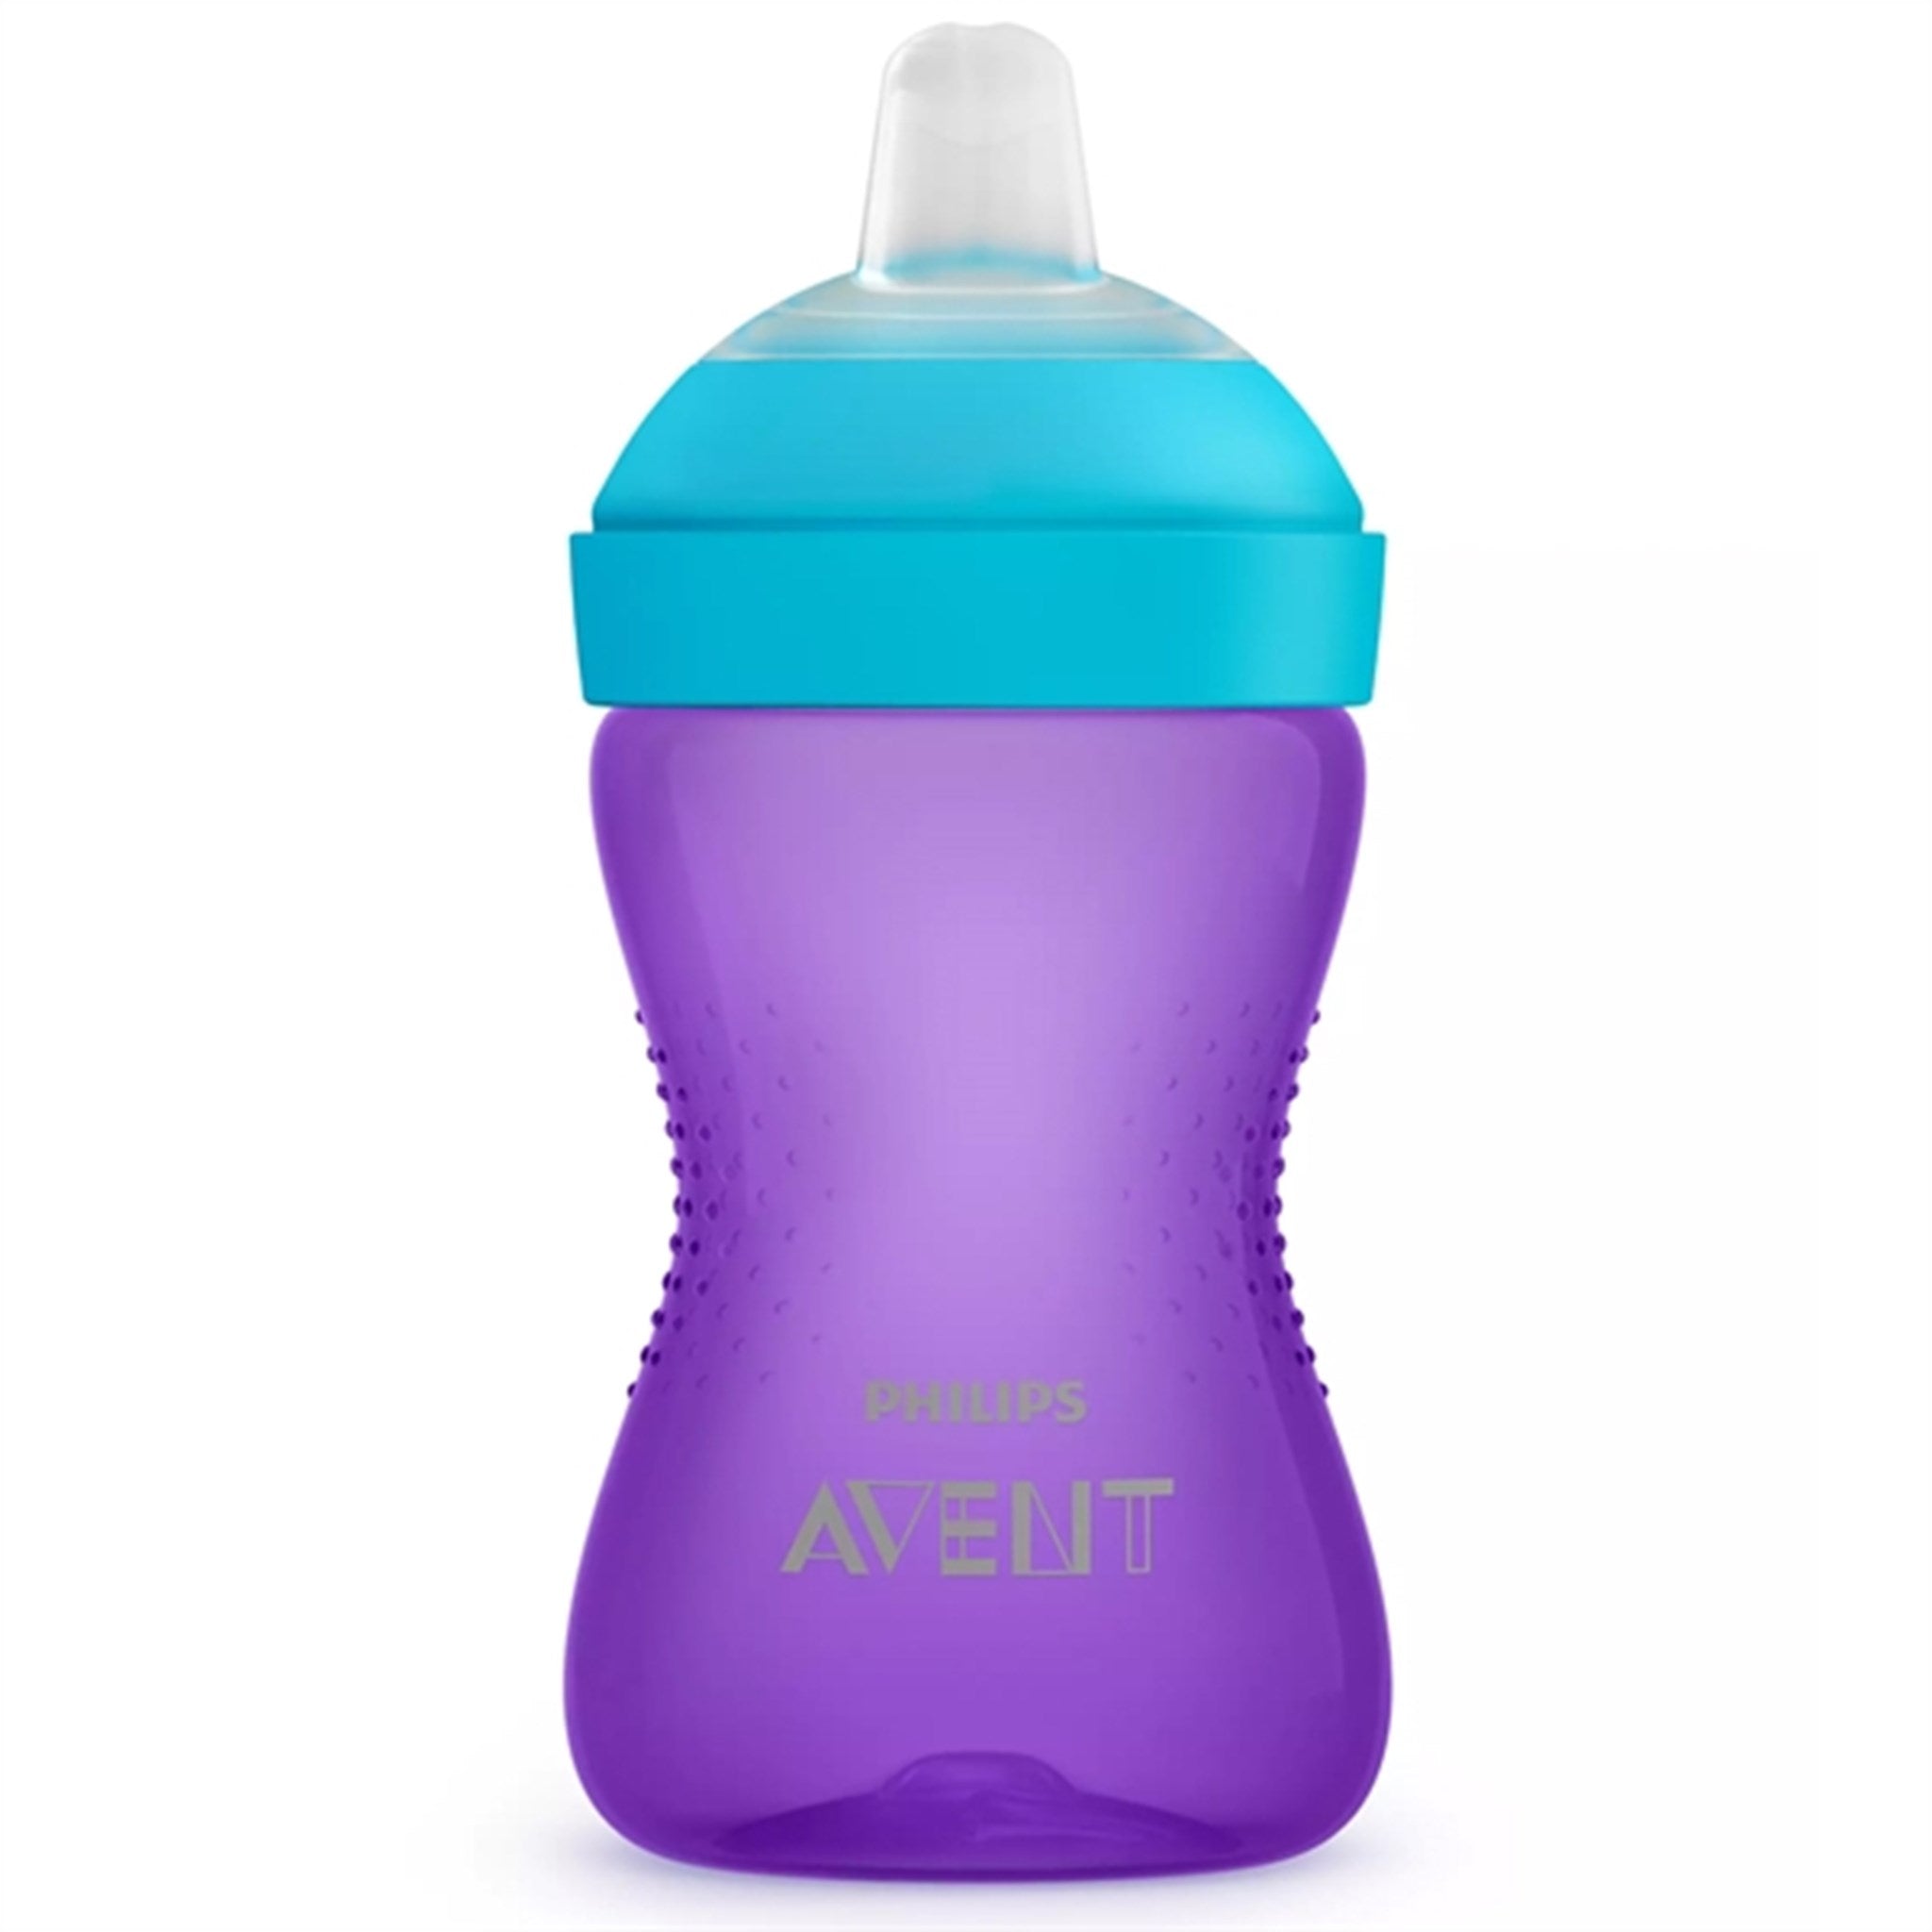 Philips Avent Soft Cup Med Pip